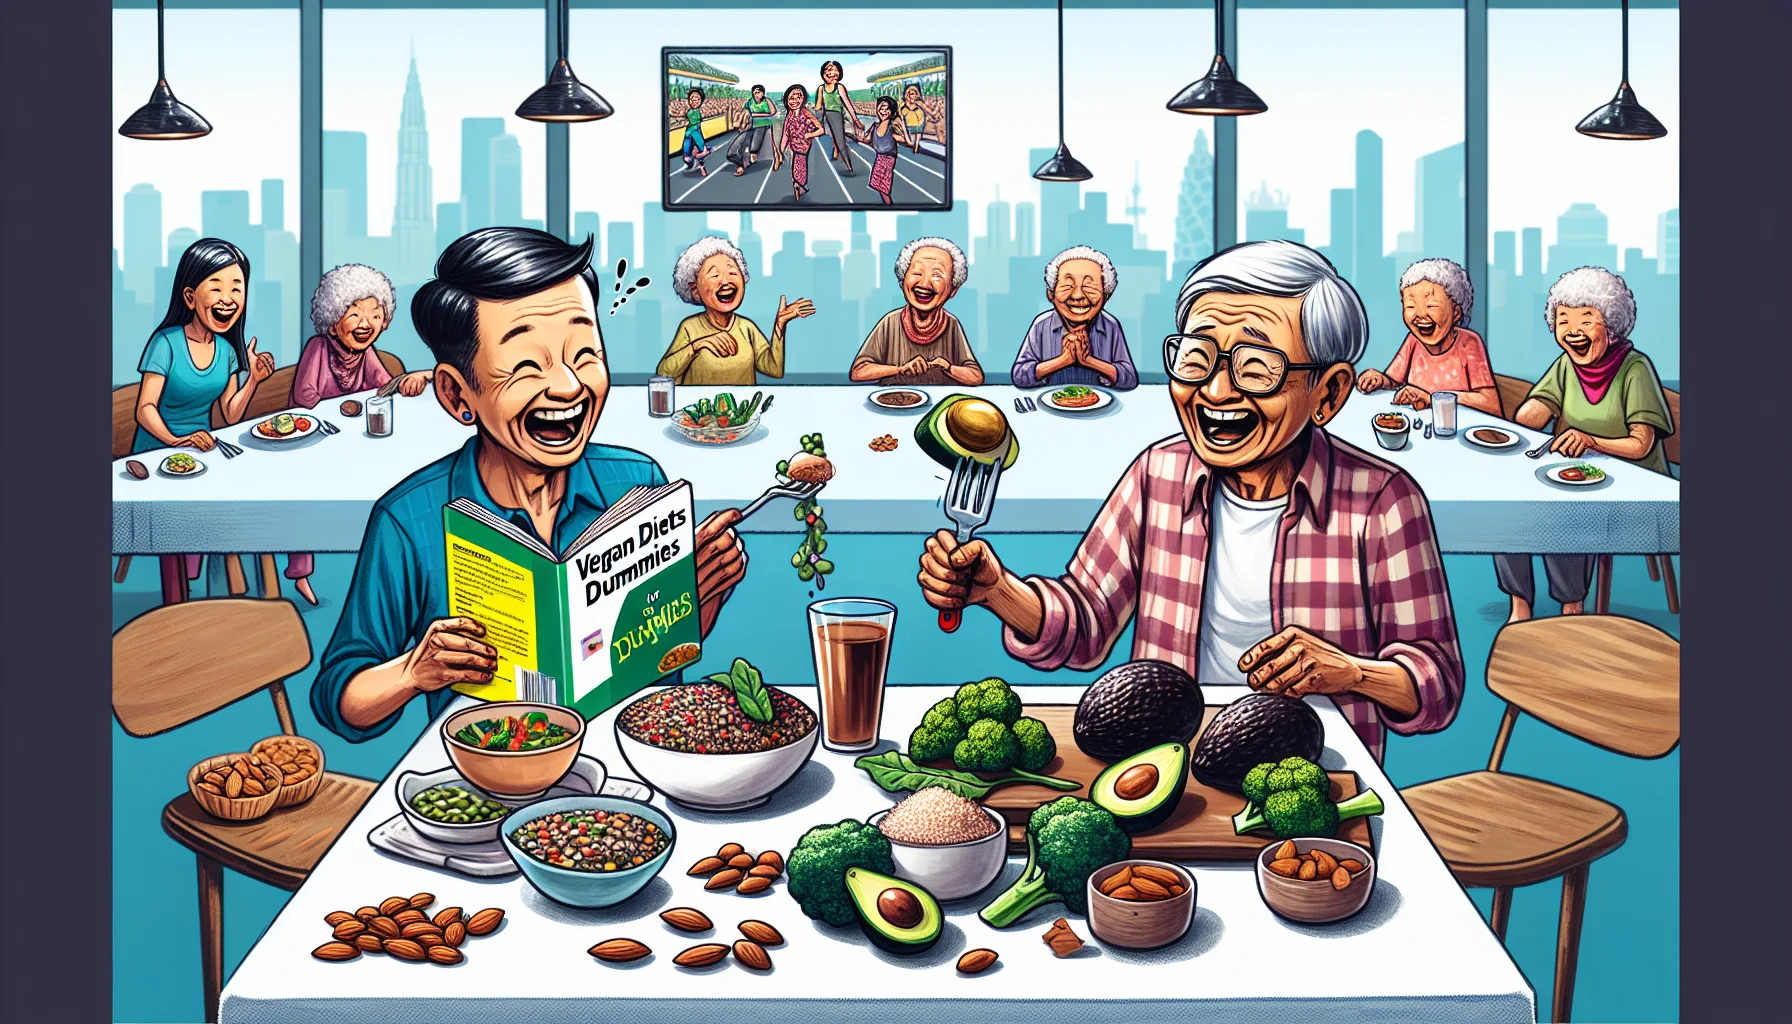 Illustrate a humorous real-life moment around healthy eating and diets involving elderly individuals. Show a dining table loaded with a variety of vegan foods, each known for their high fiber content. This could include food items like lentils, broccoli, avocados, almonds, and quinoa. On one end of the table, depict a Asian elderly man chuckling while reading 'Vegan Diets for Dummies', while at the other end, a Hispanic elderly woman is laughing out loud as she tries to peel an avocado with a large kitchen knife. In the background, show a TV where a fitness program for seniors is being broadcasted.